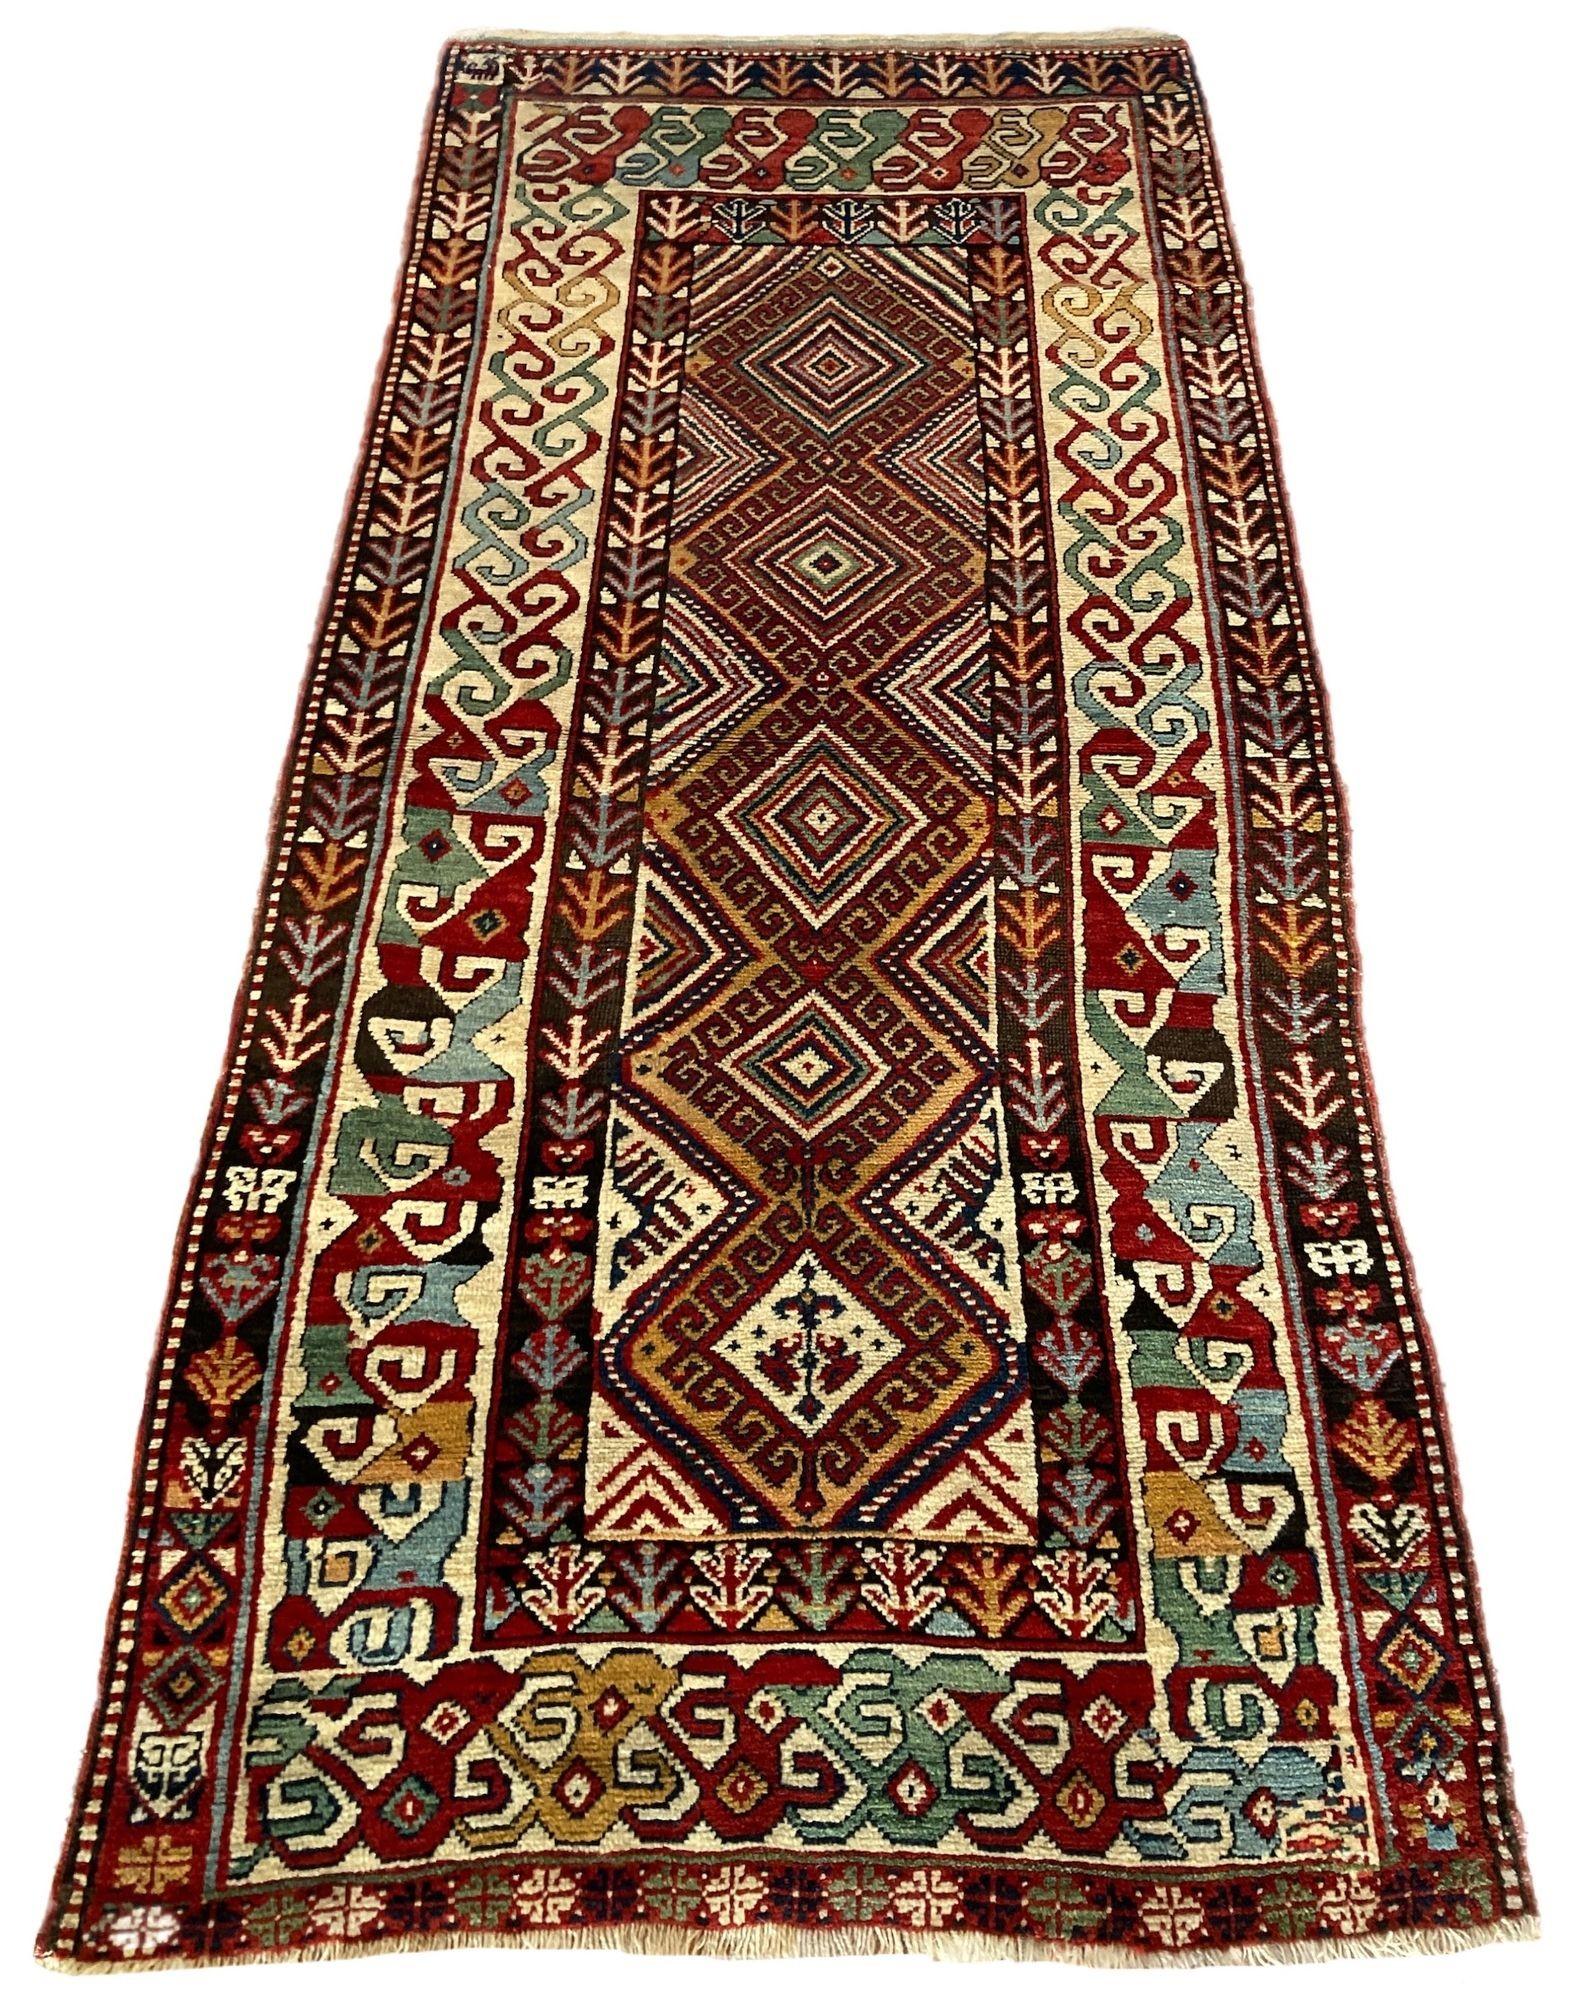 A beautiful antique Kazak long rug, handwoven in the Caucasus mountains of Central Asia circa 1910. The design features 5 geometrical medallions on a gold field and some fabulous secondary colours. Note the way the border design changes throughout